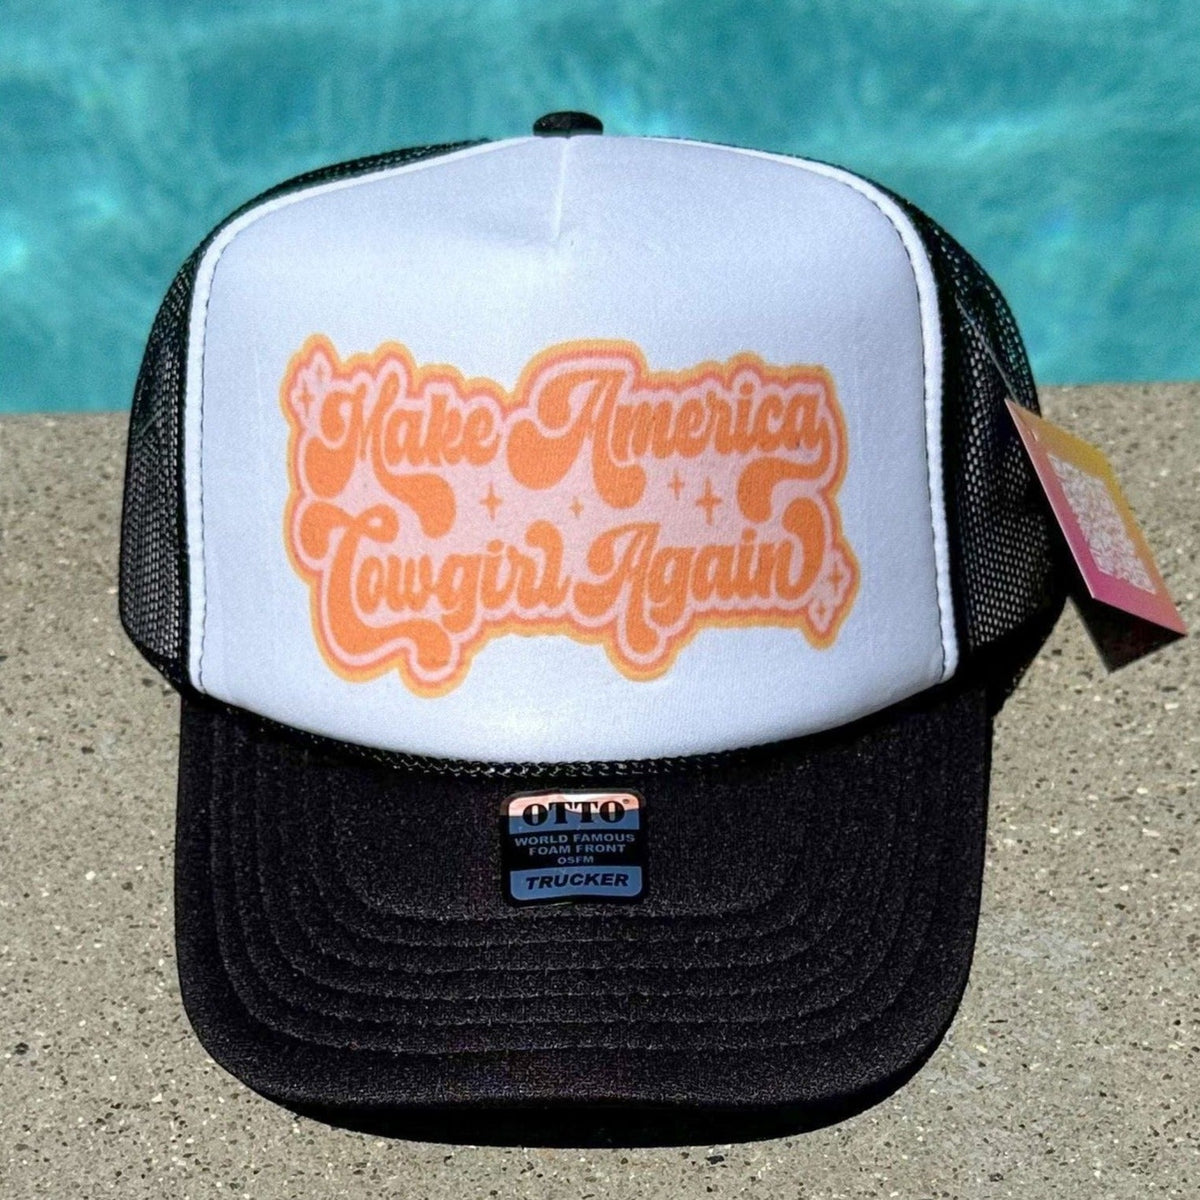 Make America Cowgirl Again | Black, White, Orange Trucker Hat by Haute Sheet Hats TheFringeCultureCollective